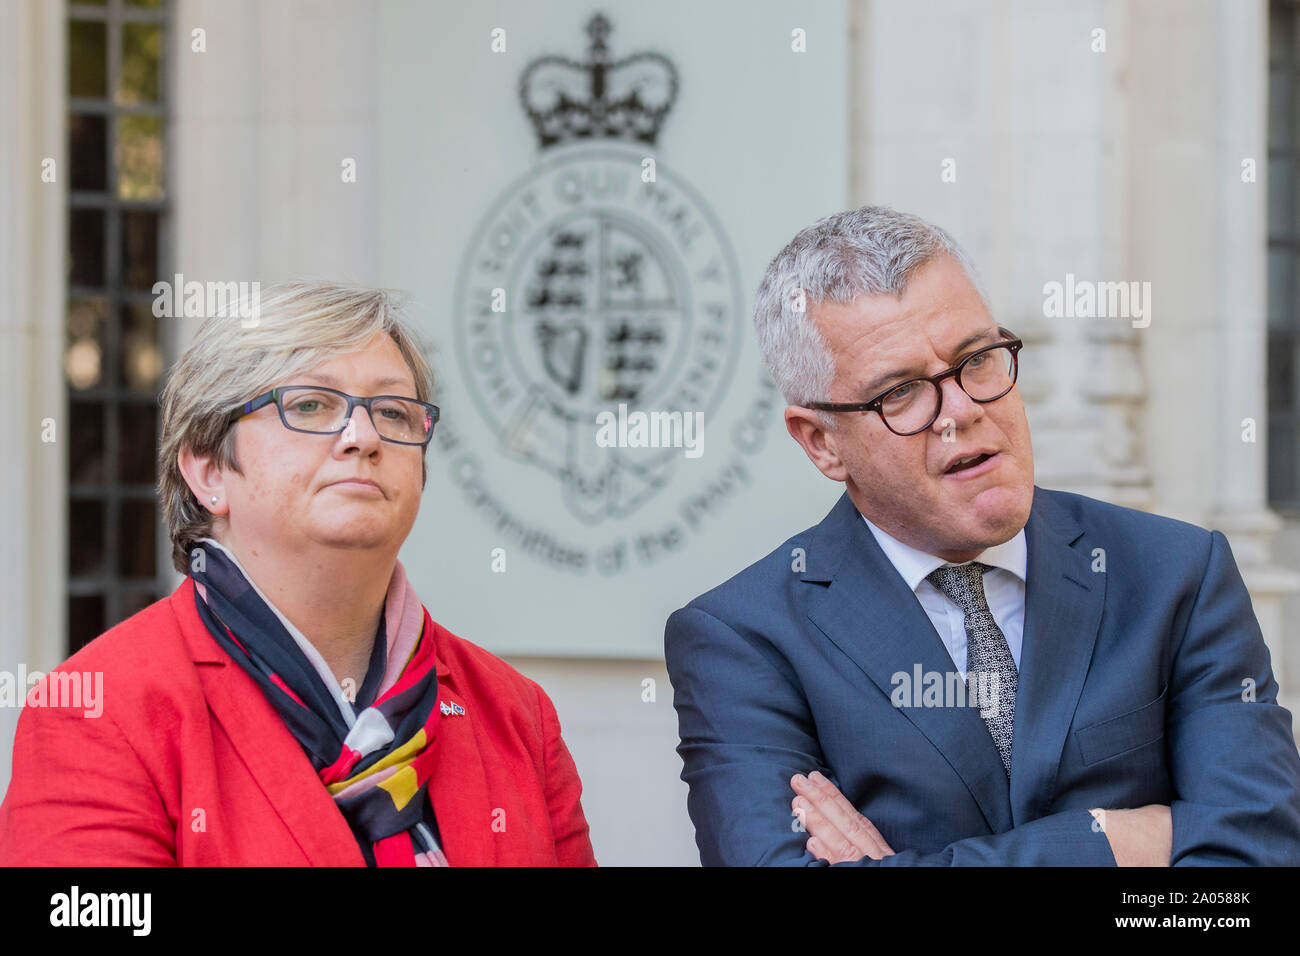 London, UK . 19th Sep 2019. Joanna Cherry and Julian Maughan speak to the press on behalf of the side seeking a recall of parliament - The supreme court, in Parliament Sqaure,  decides on Prime Minister Boris Johnson's decision to suspend parliament. Credit: Guy Bell/Alamy Live News Stock Photo